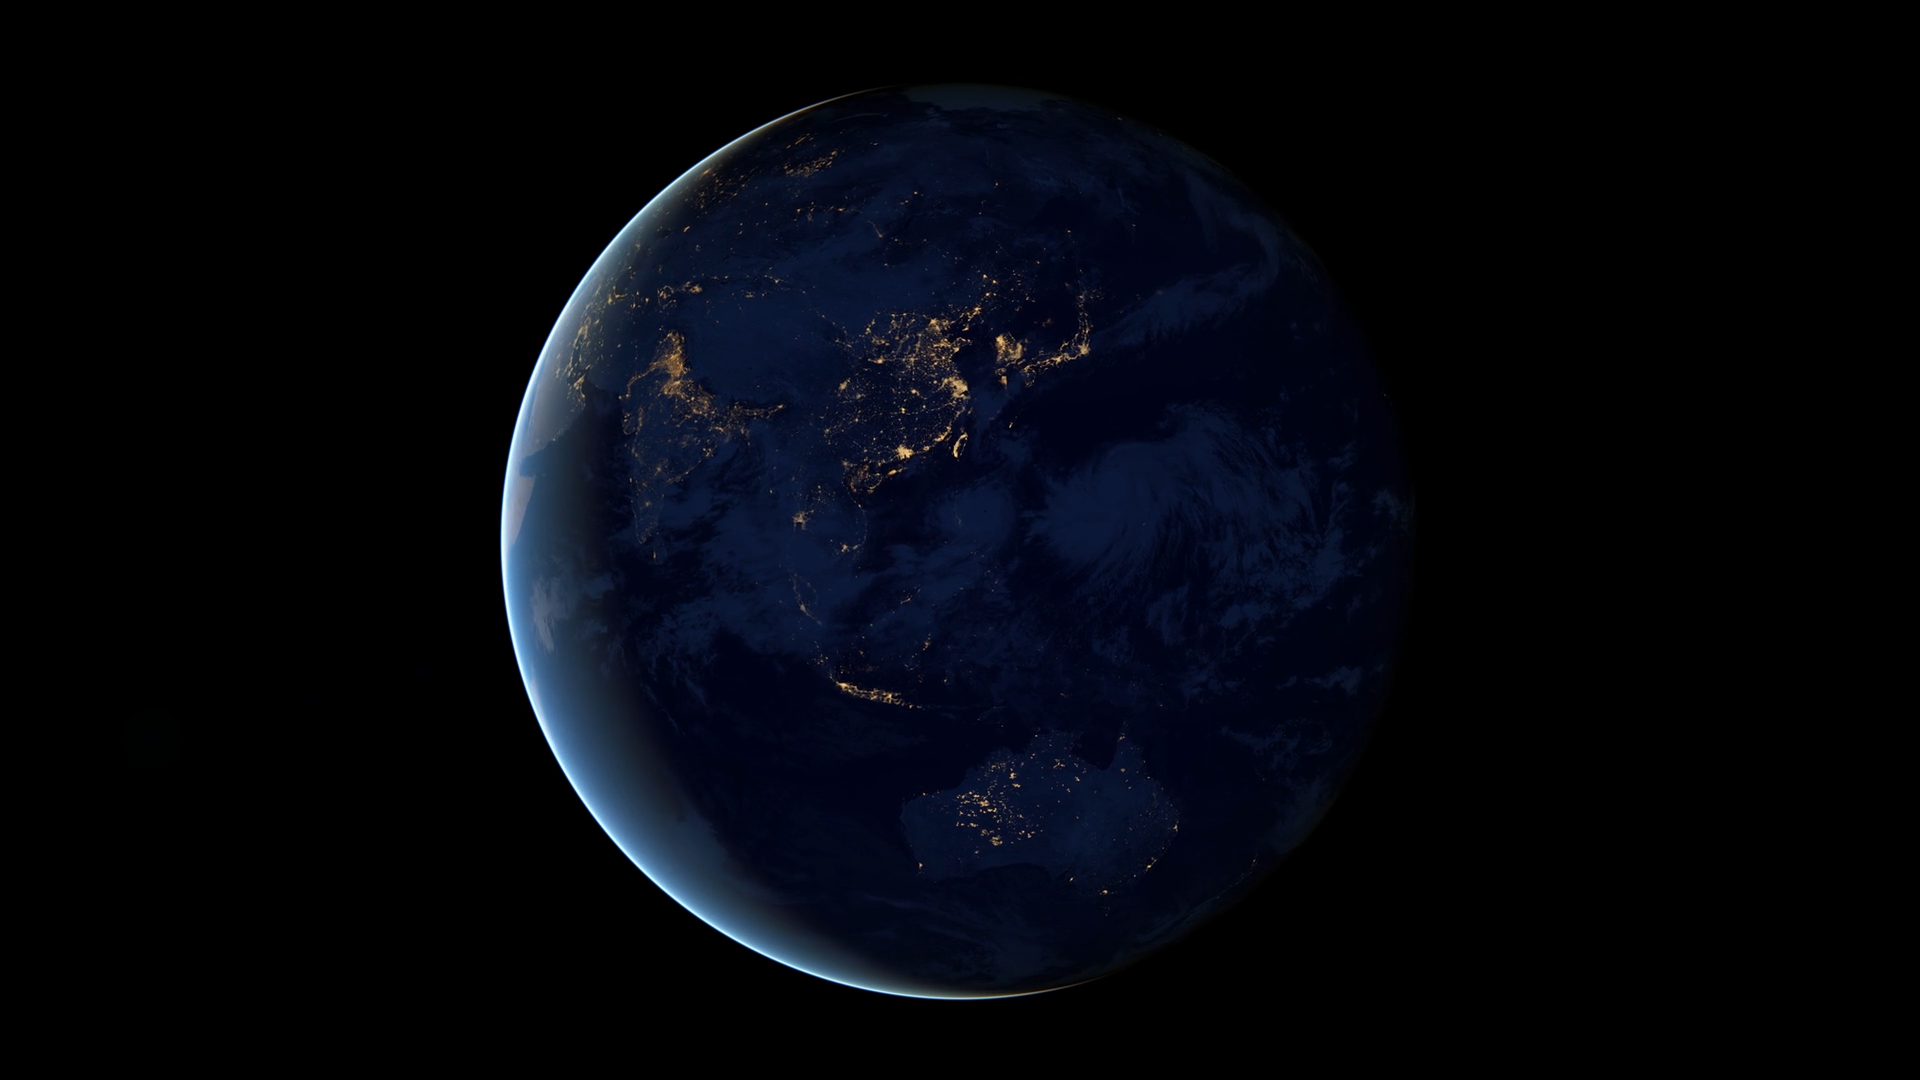 Earth S Day And Night From Space Pbs Learningmedia